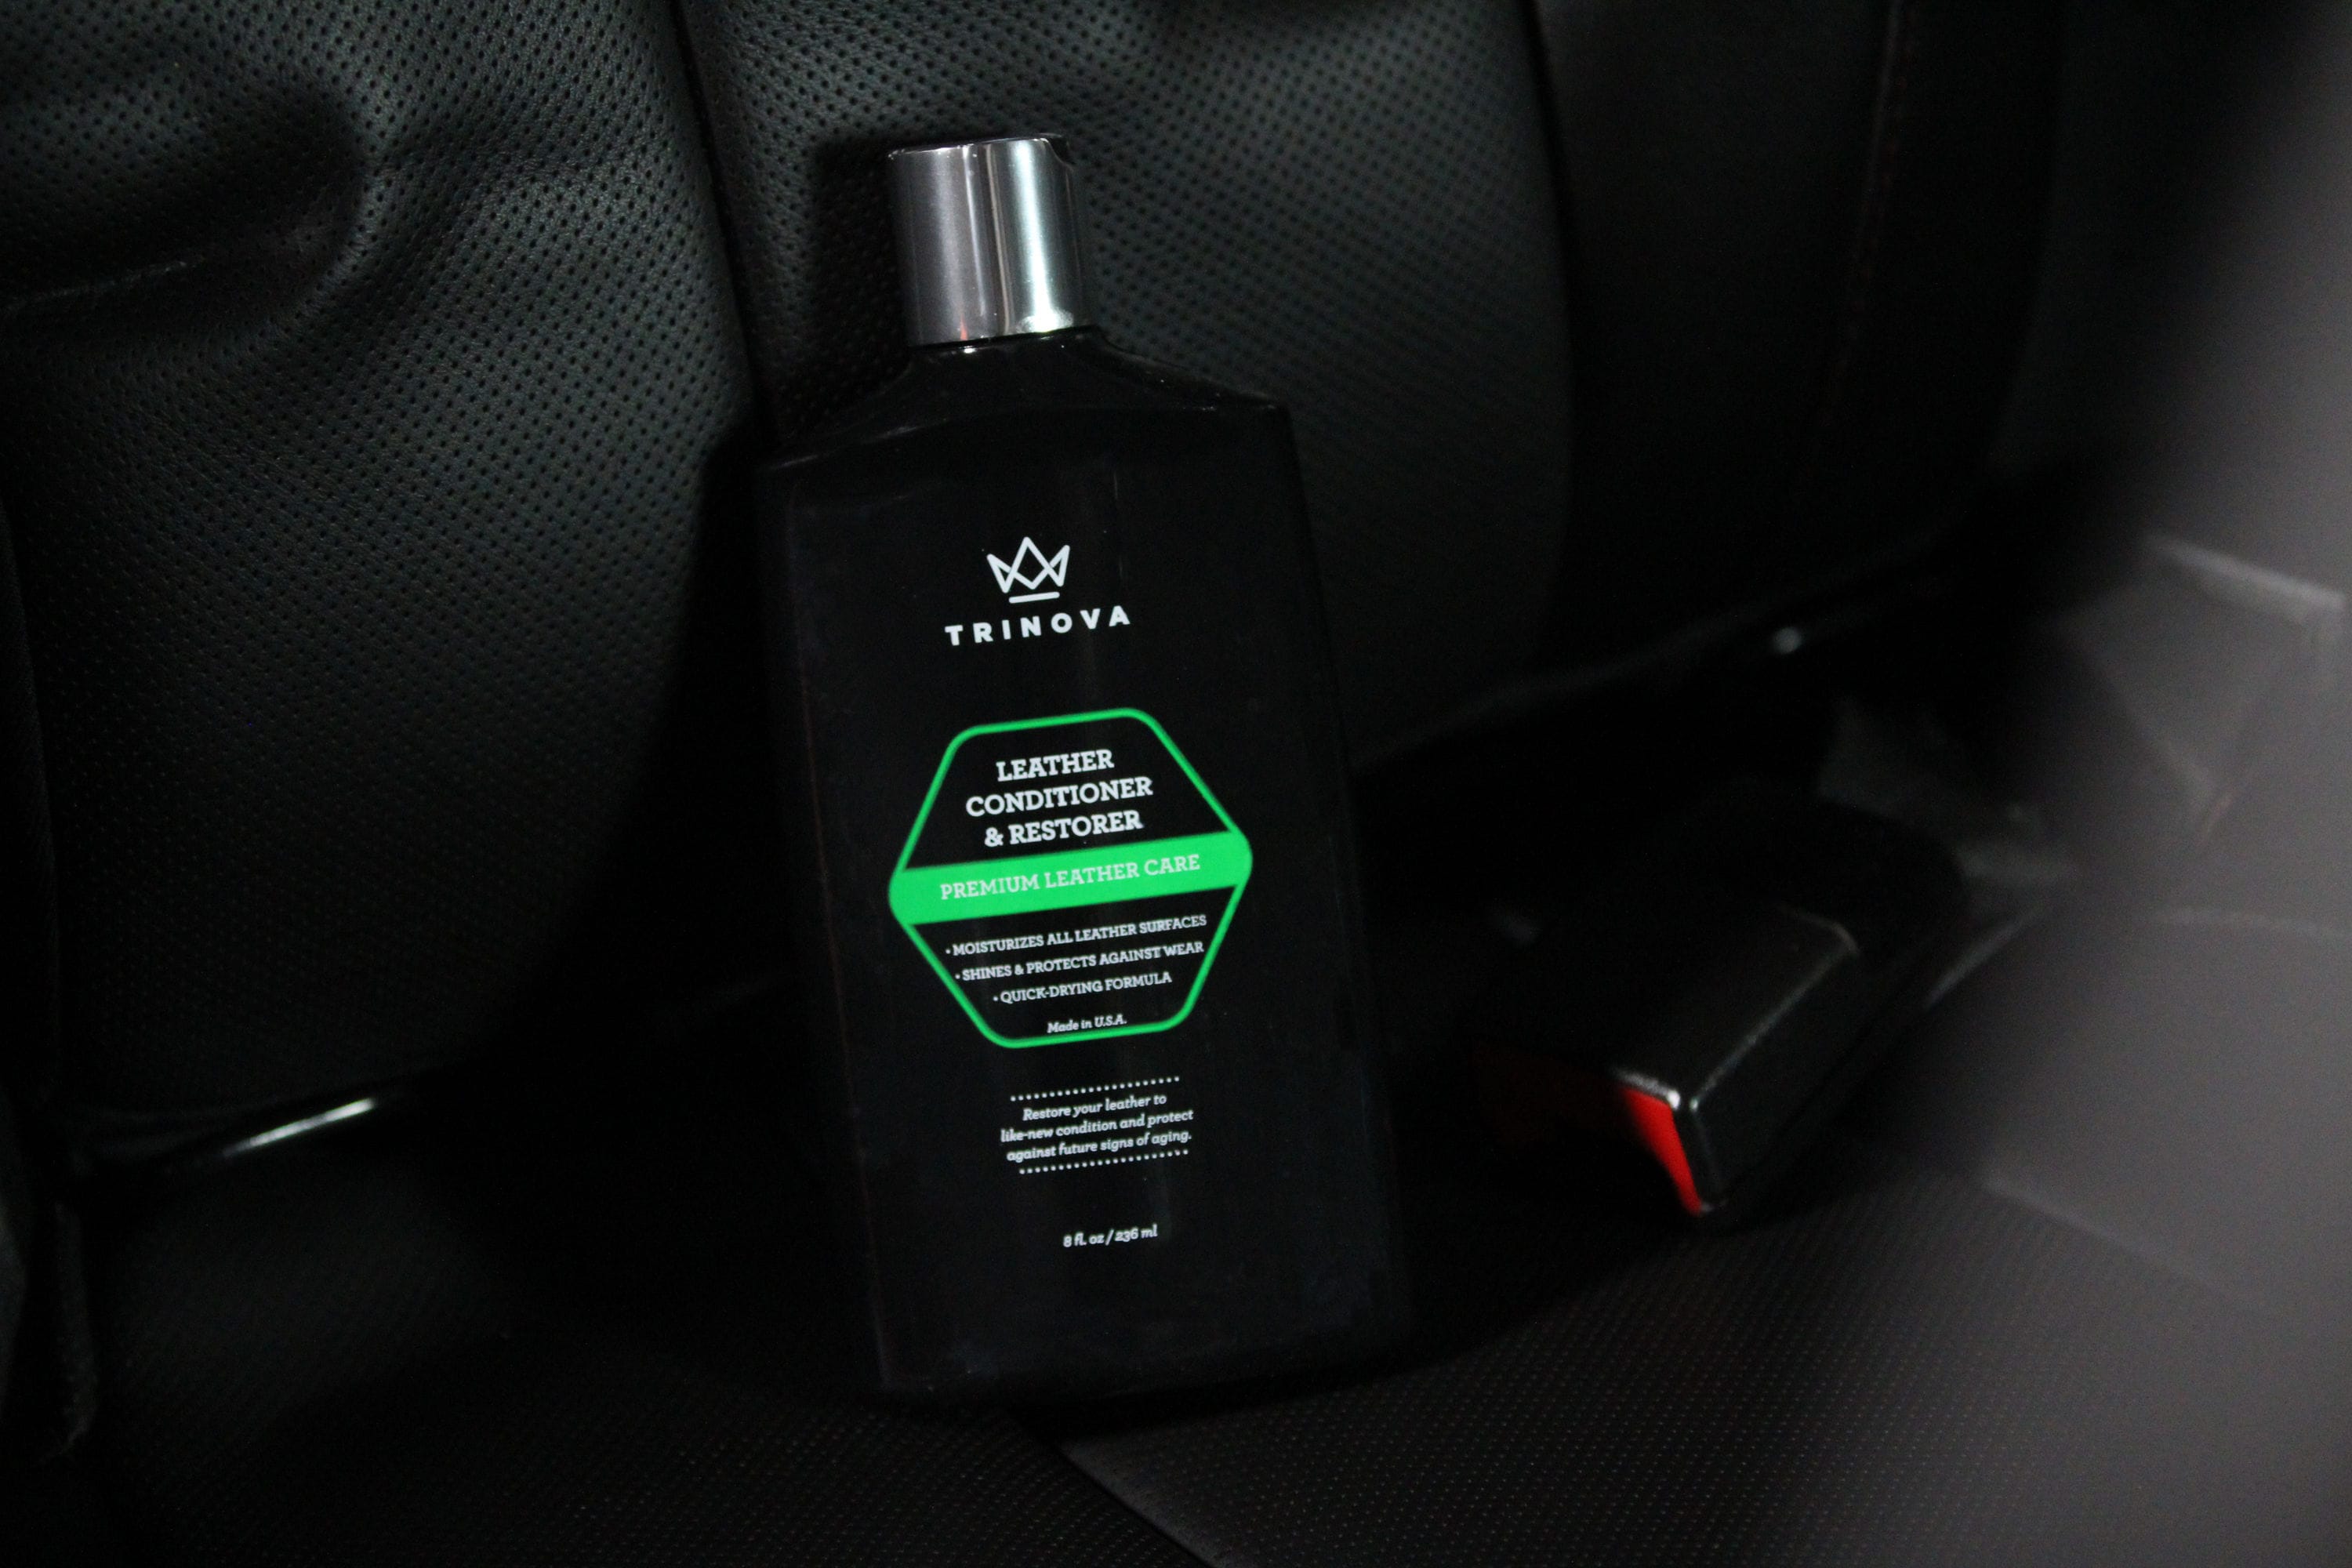 Leather Conditioner - Gallon, Make Your Leather Like New